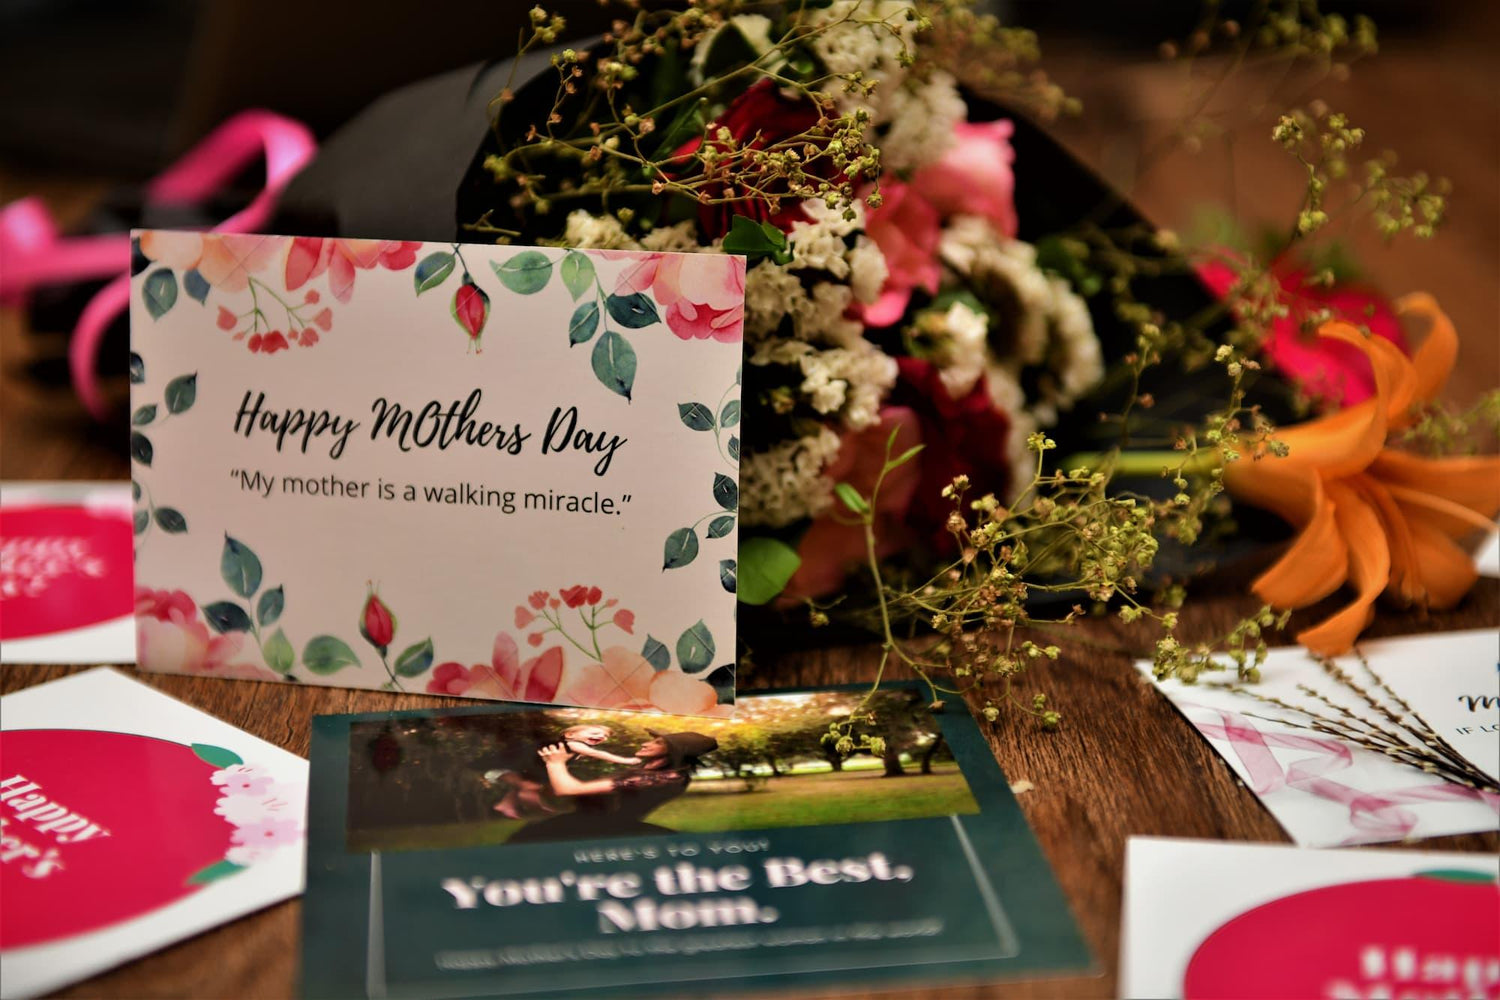 Show Your Love this Mother’s Day with a Thoughtful Gift